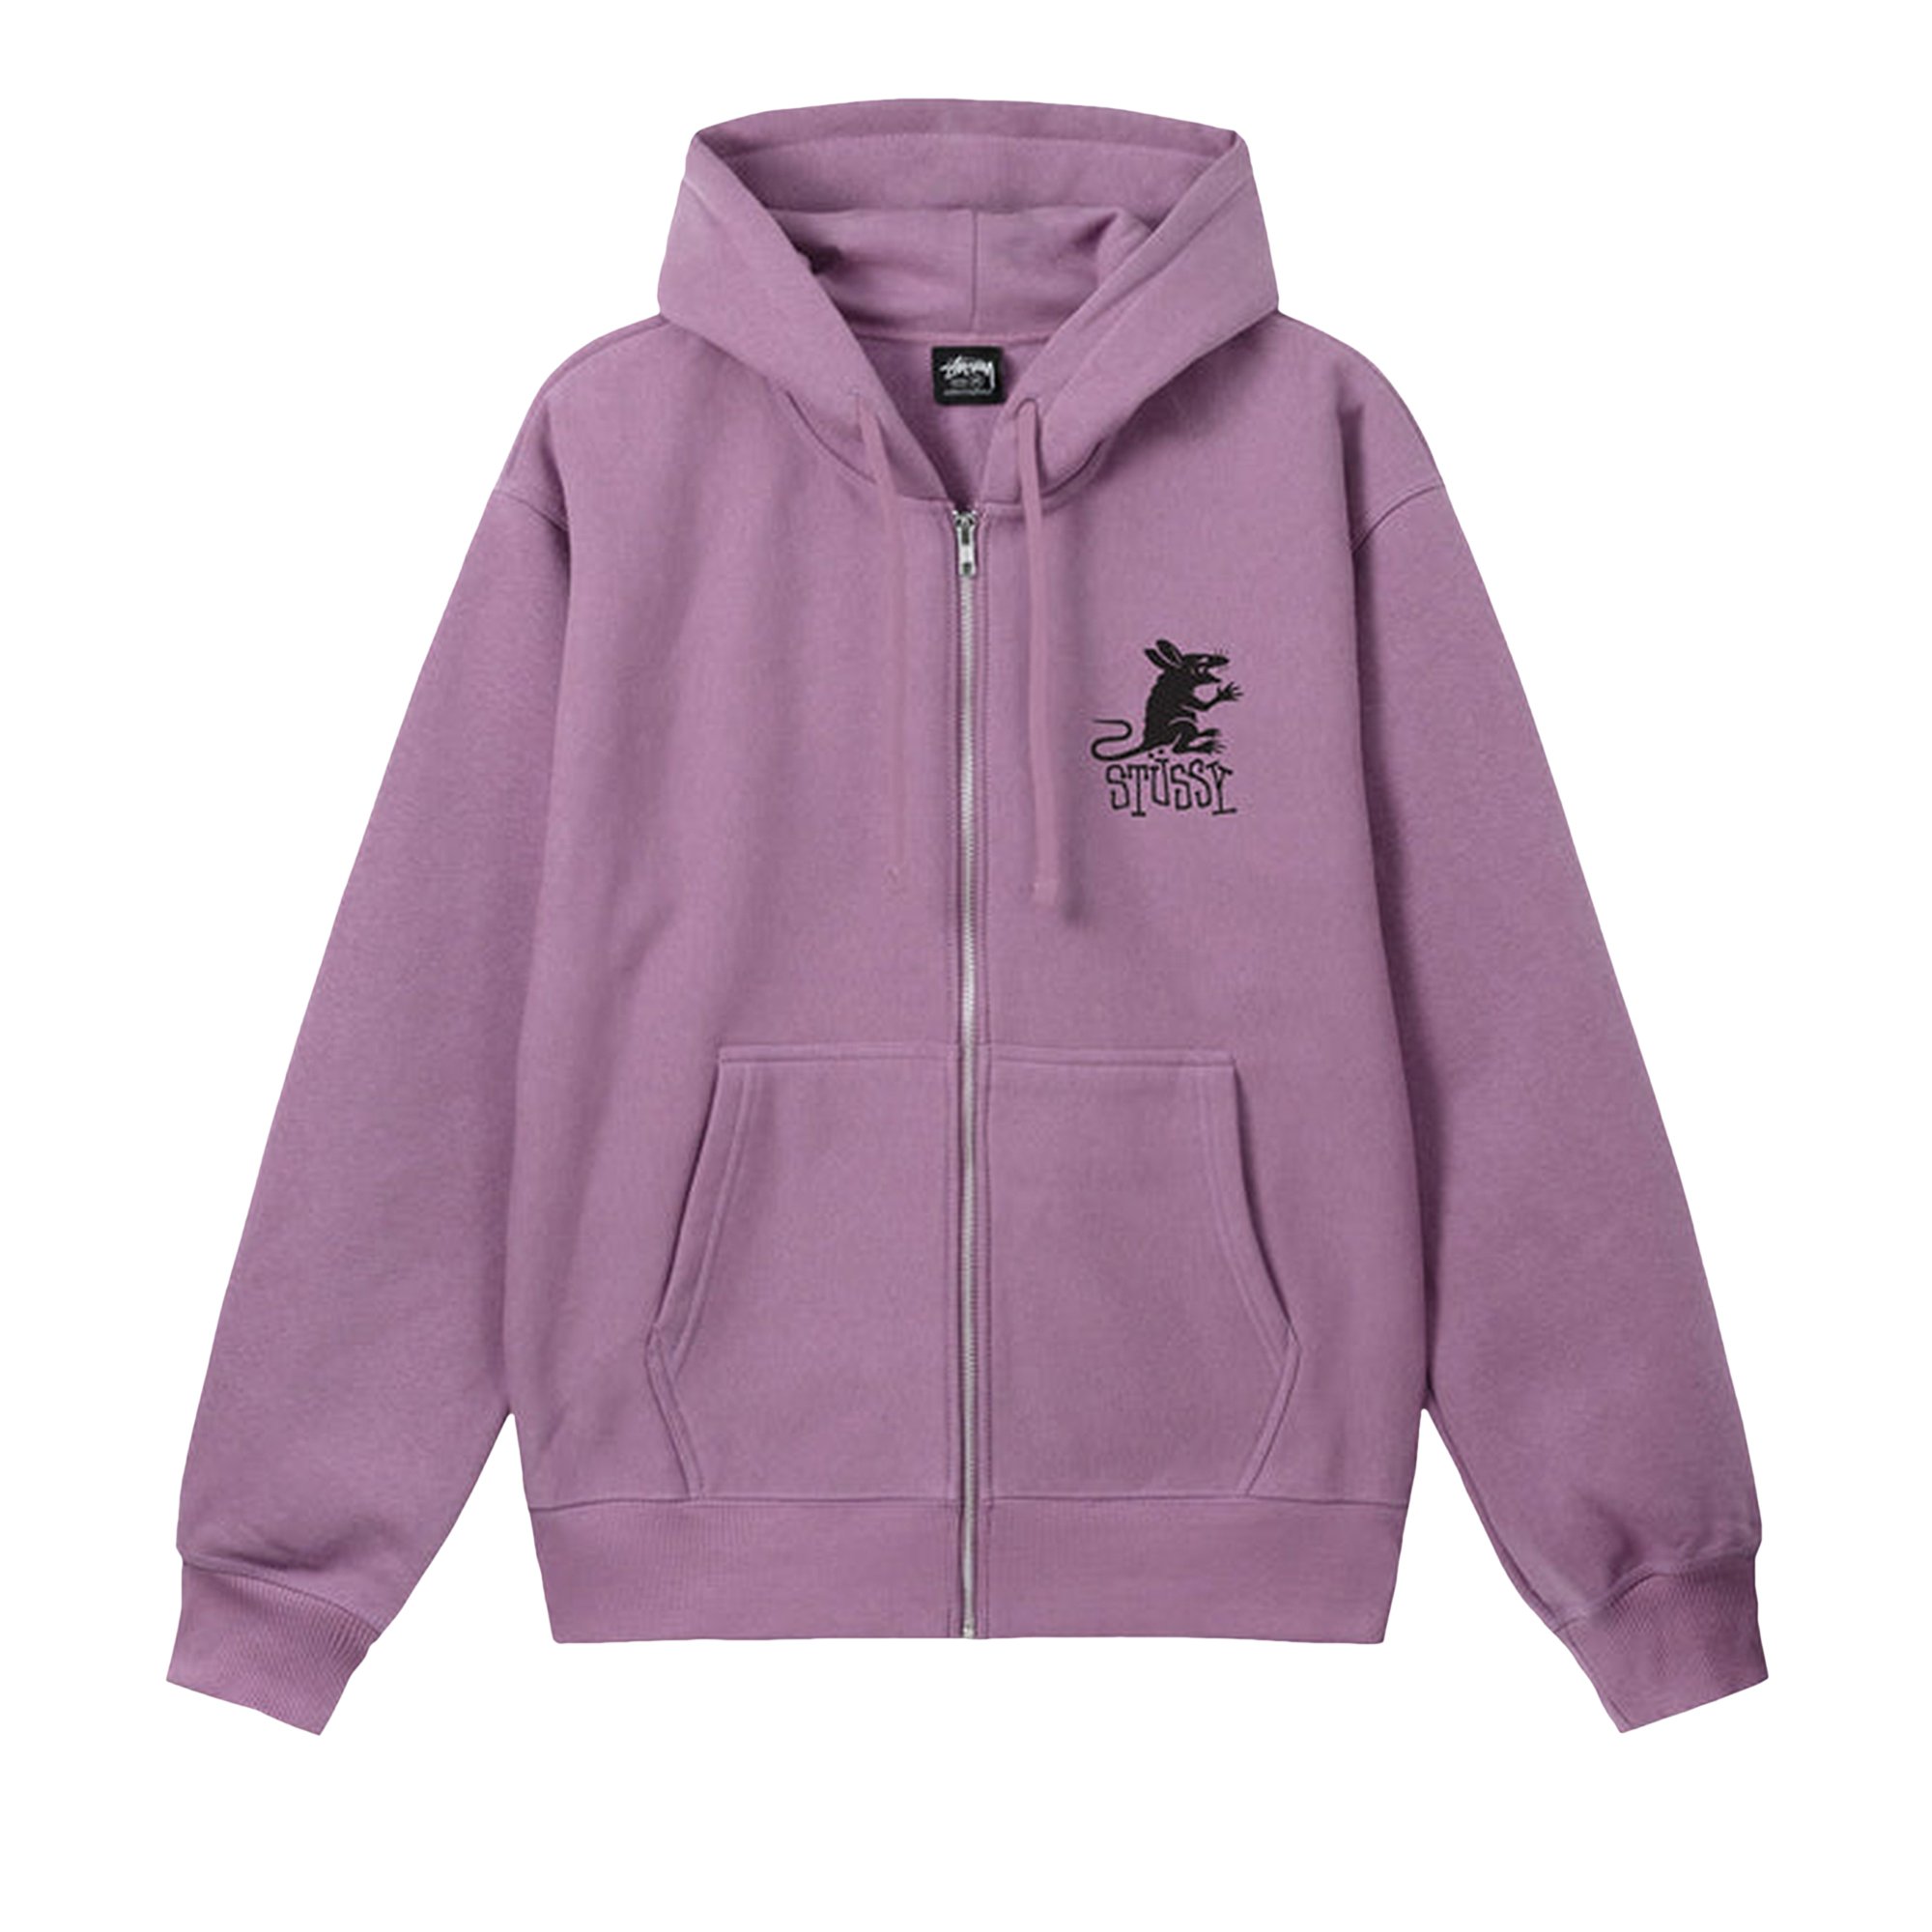 Buy Stussy Rat Zip Hoodie 'Orchid' - 1974840 ORCH | GOAT